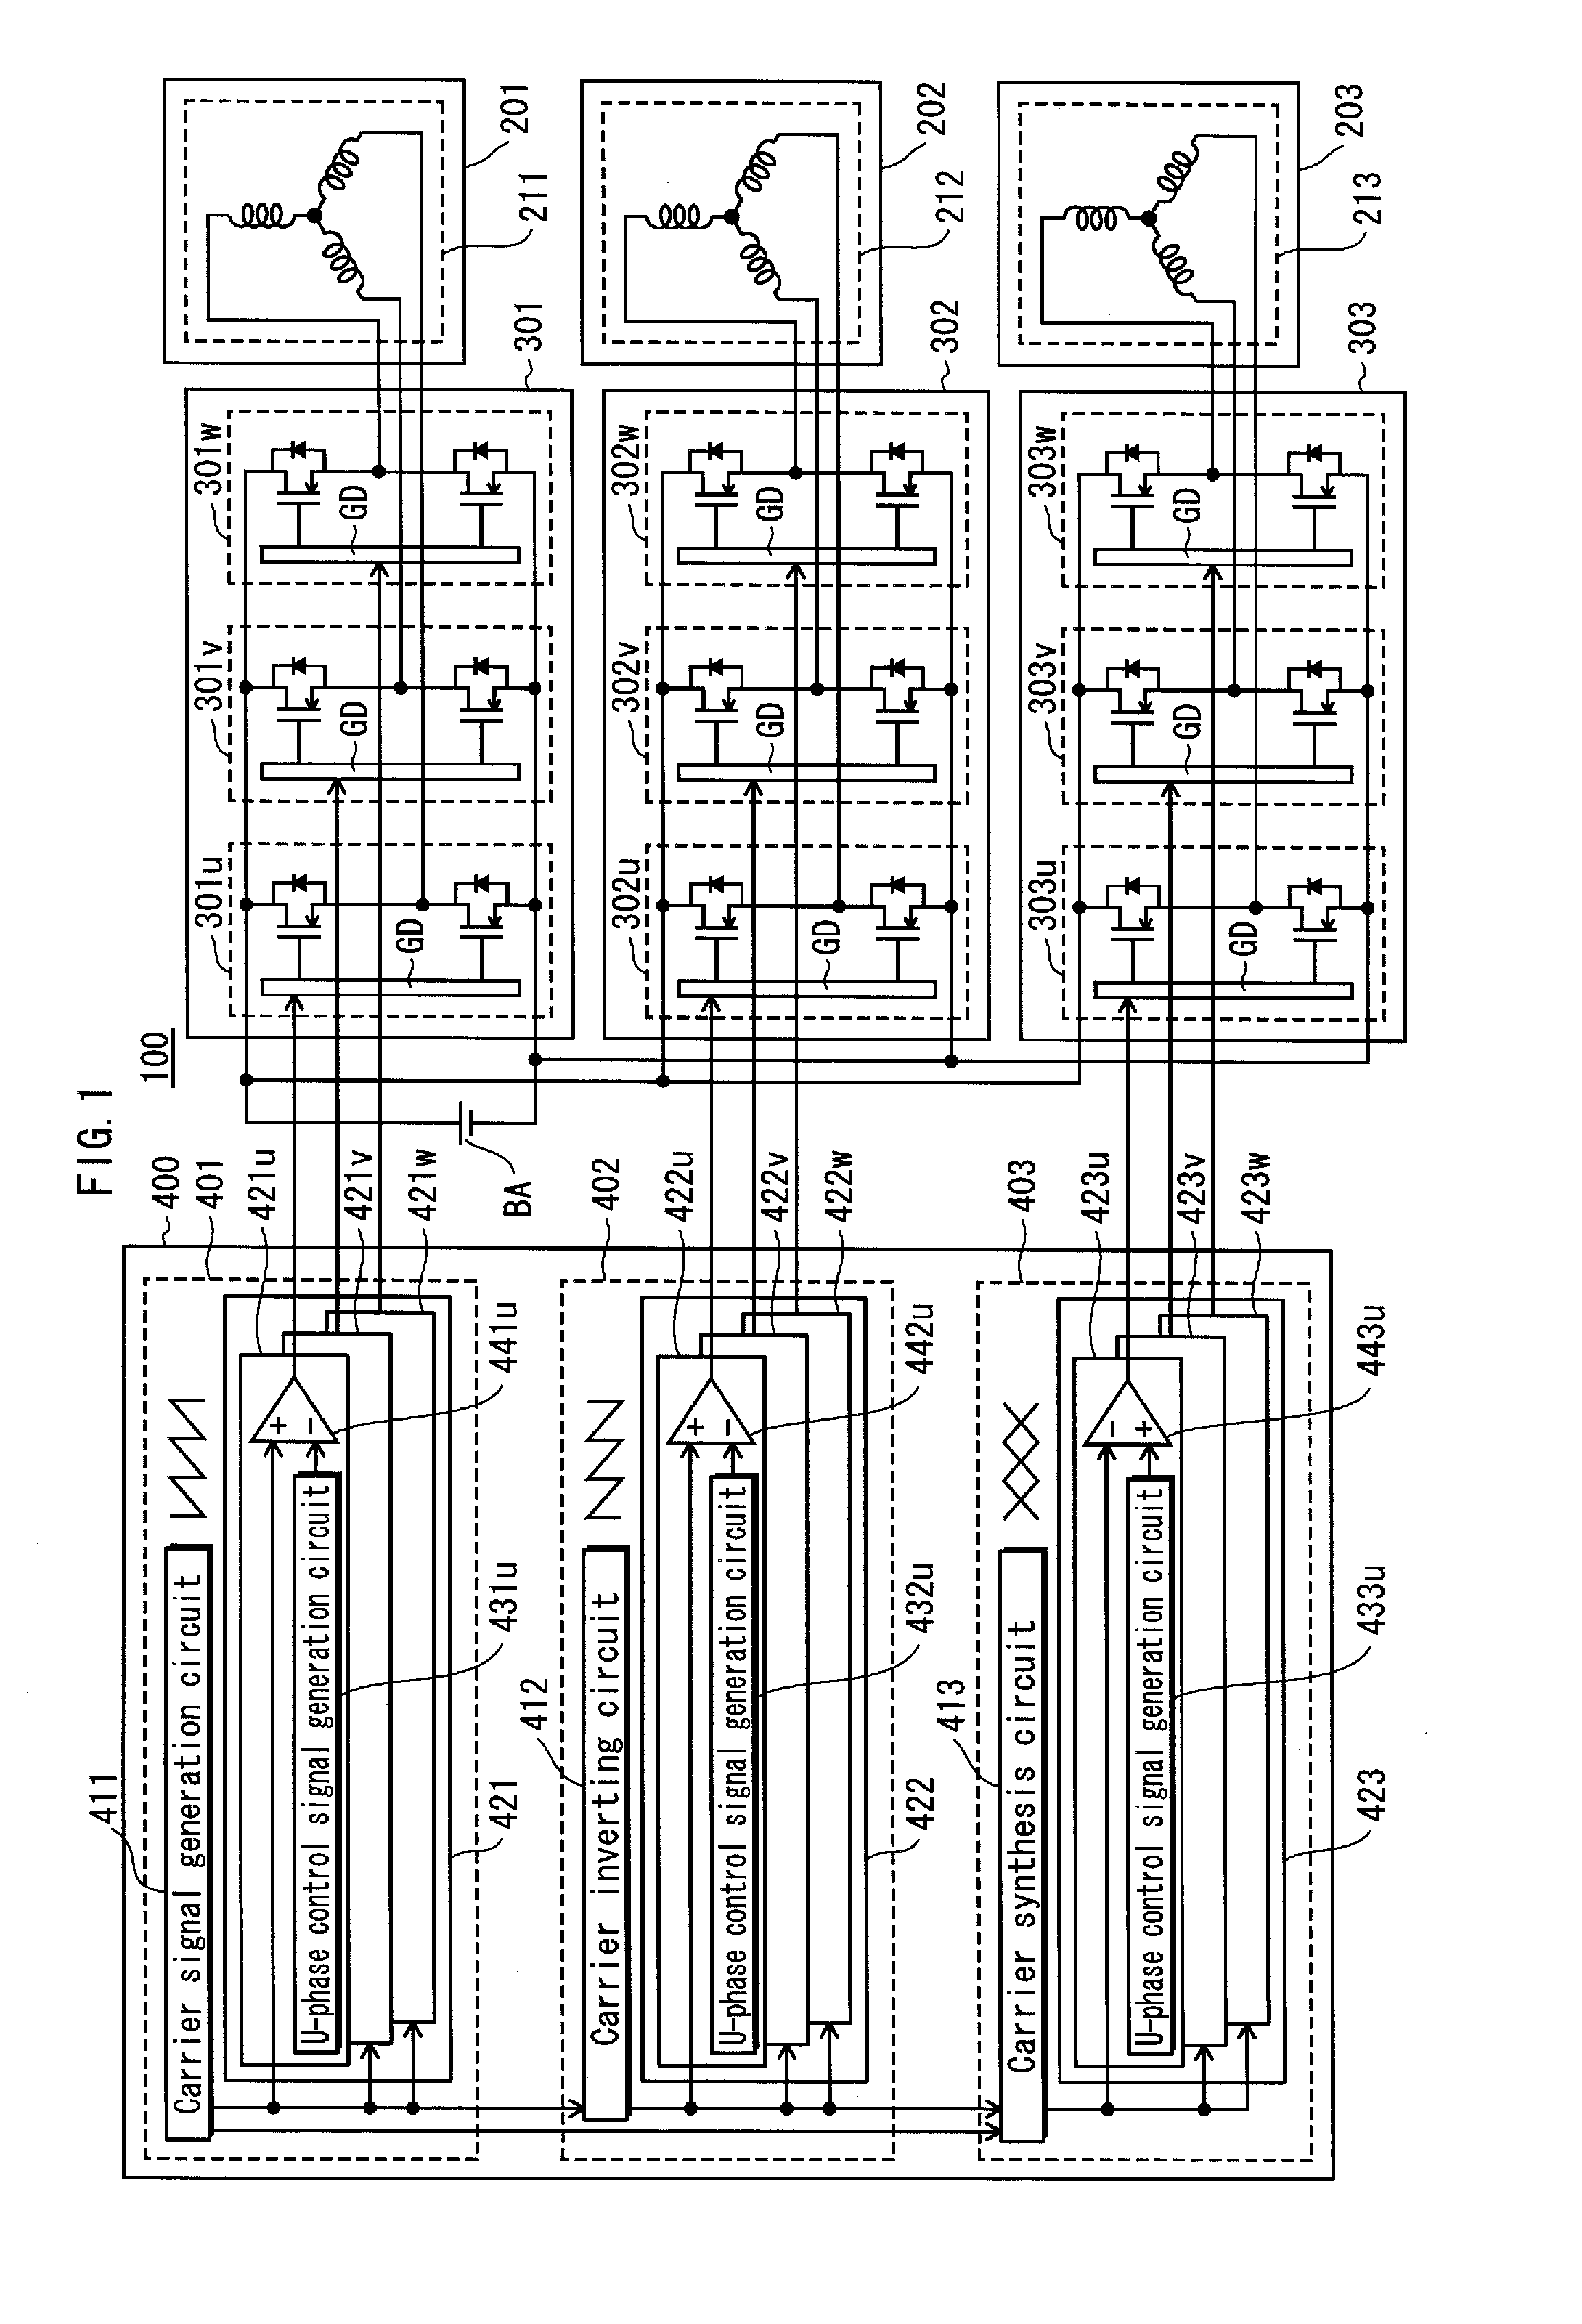 Load drive system, motor drive system, and vehicle control system